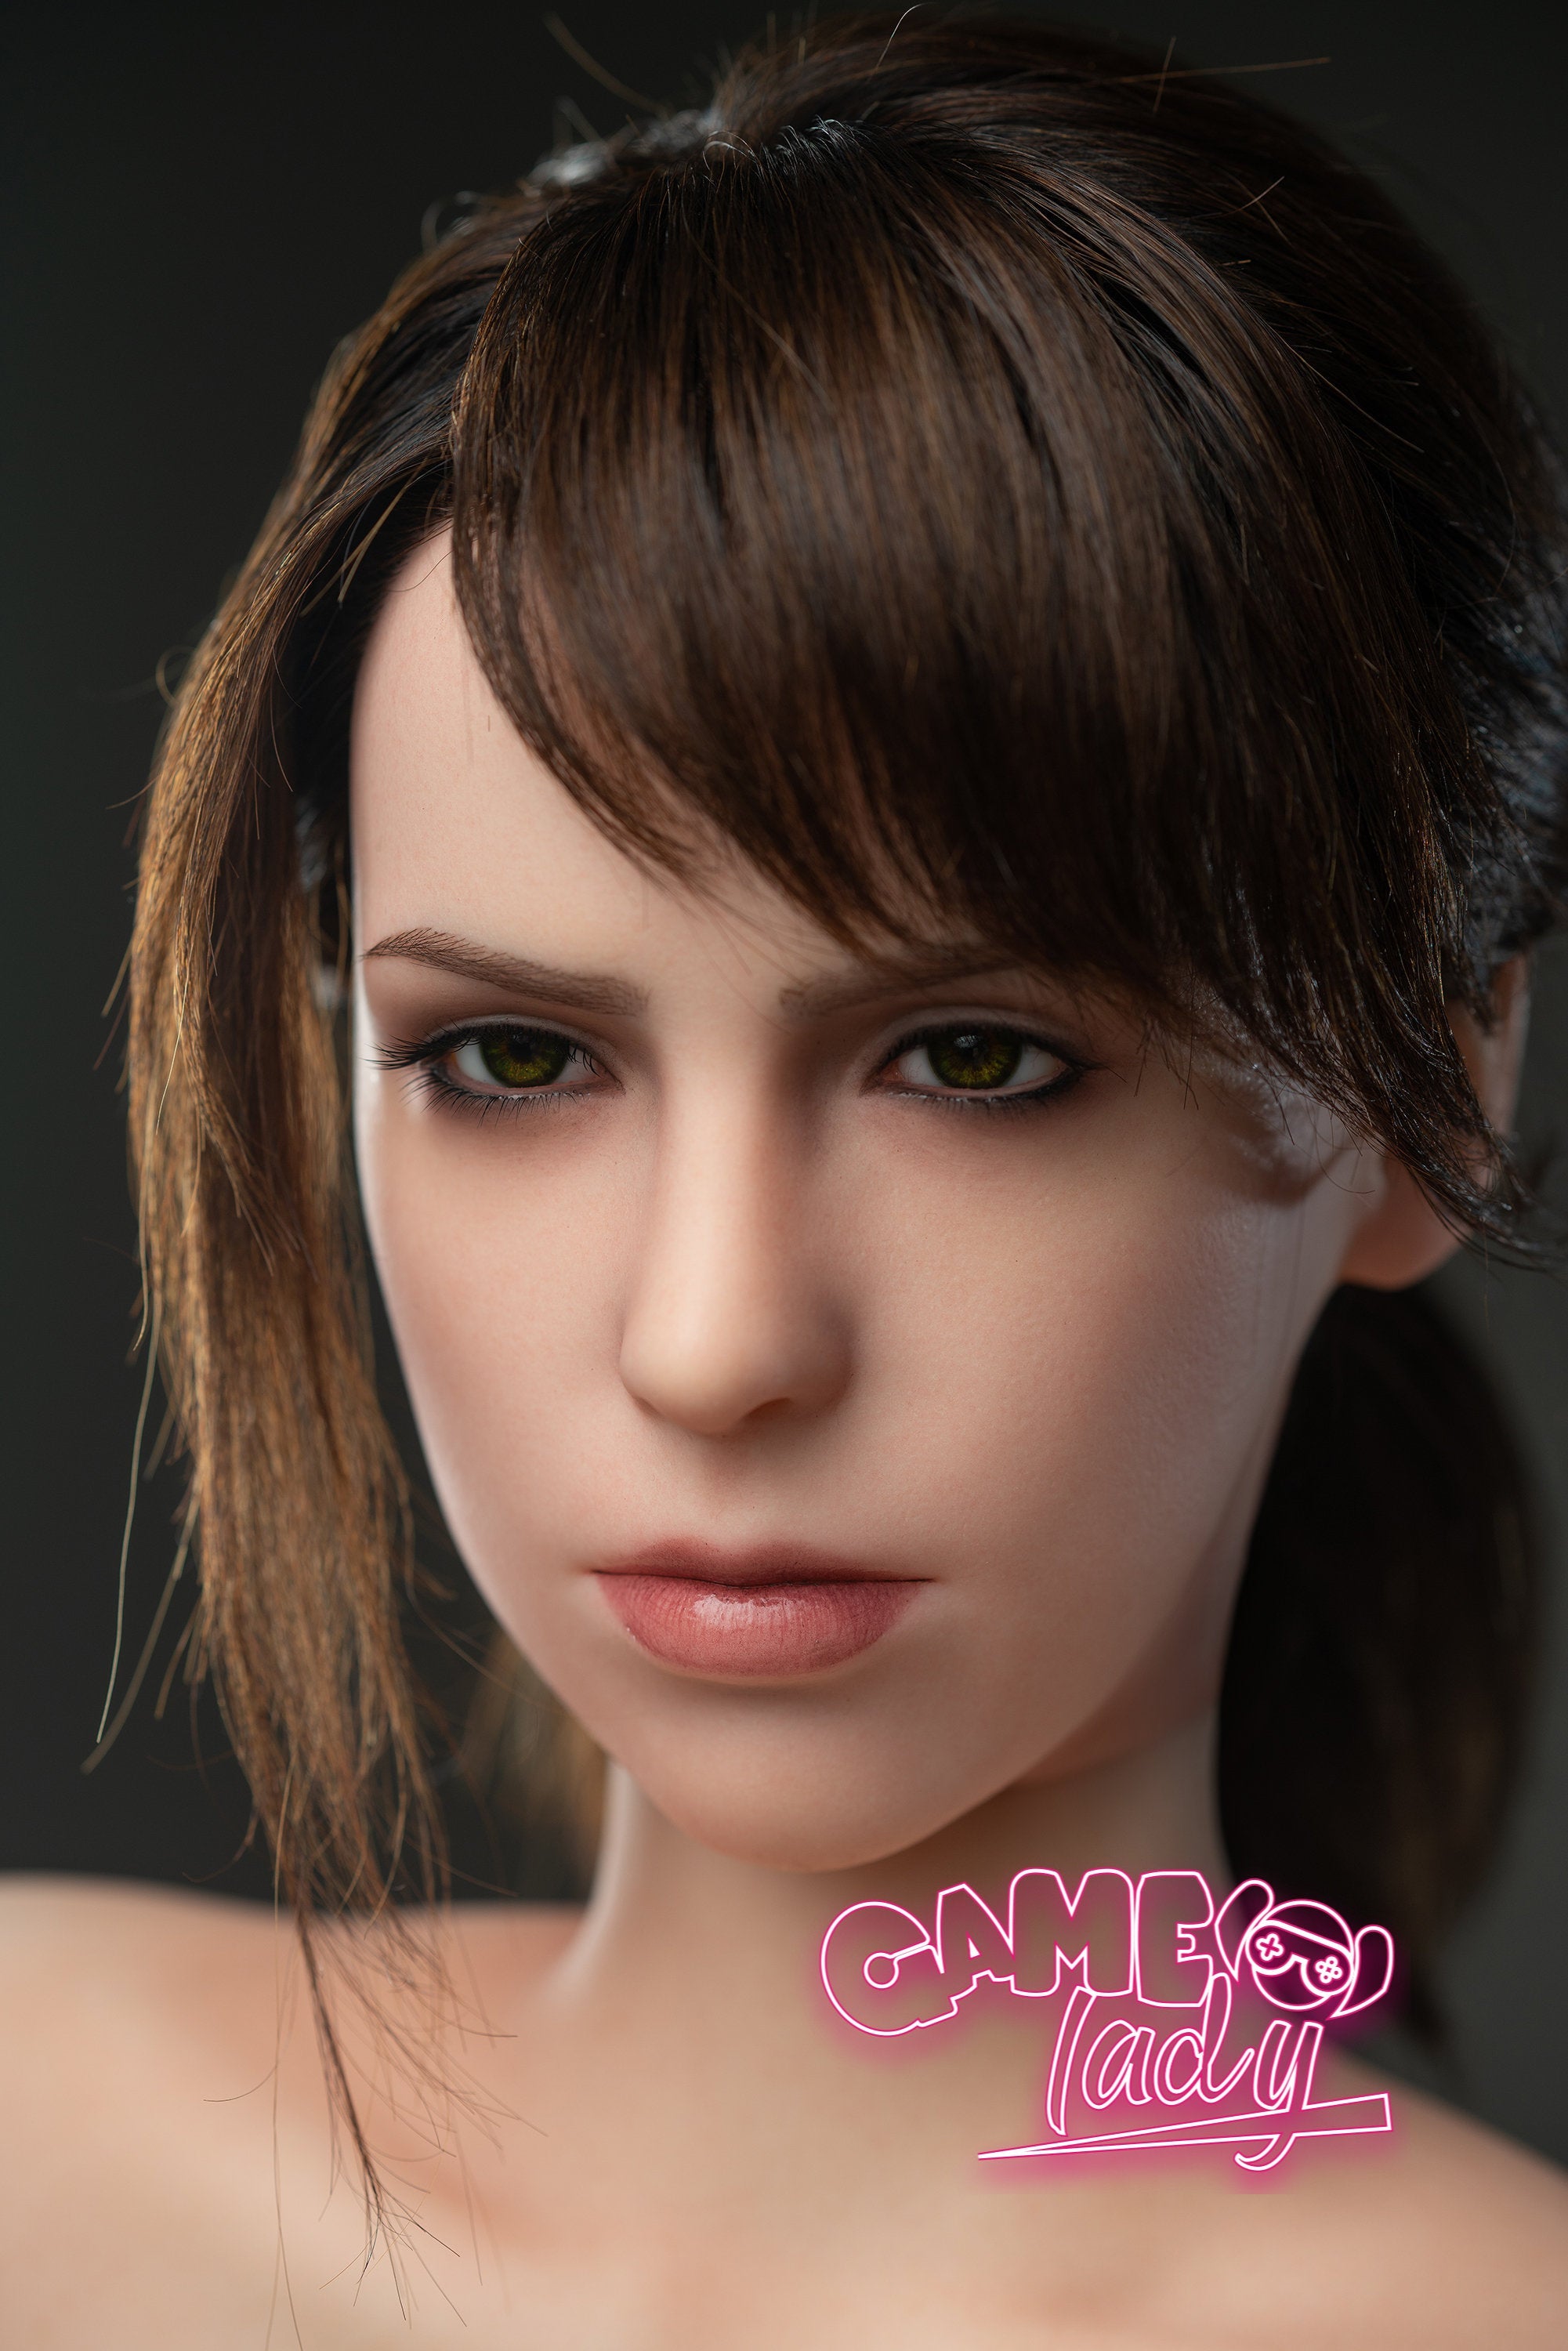 Game Lady 168 cm Silicone - Quiet V1 | Buy Sex Dolls at DOLLS ACTUALLY